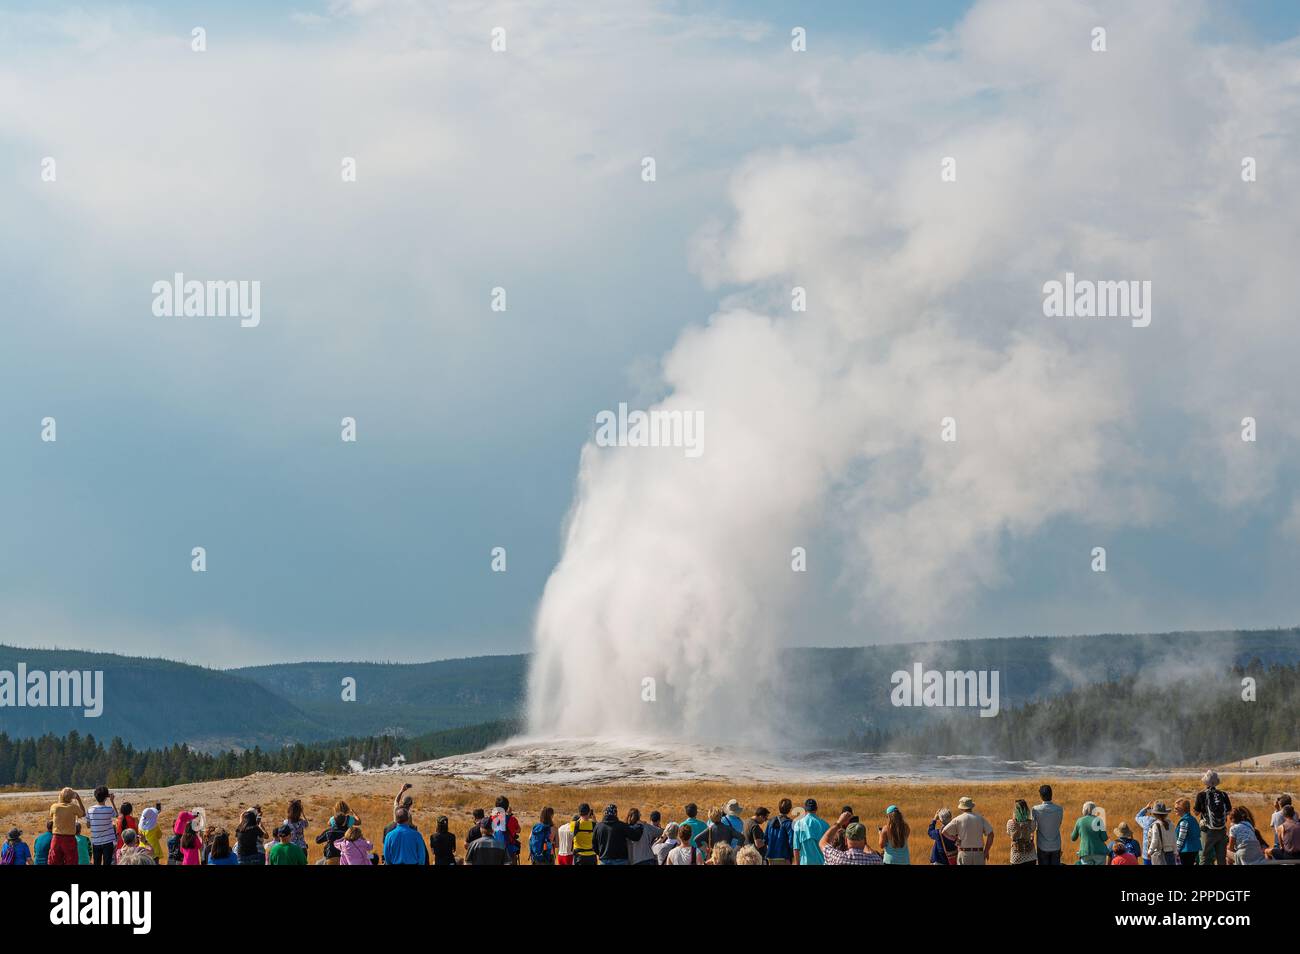 Erupting Old Faithful geyser hot spring with tourists, Yellowstone national park, USA. Stock Photo